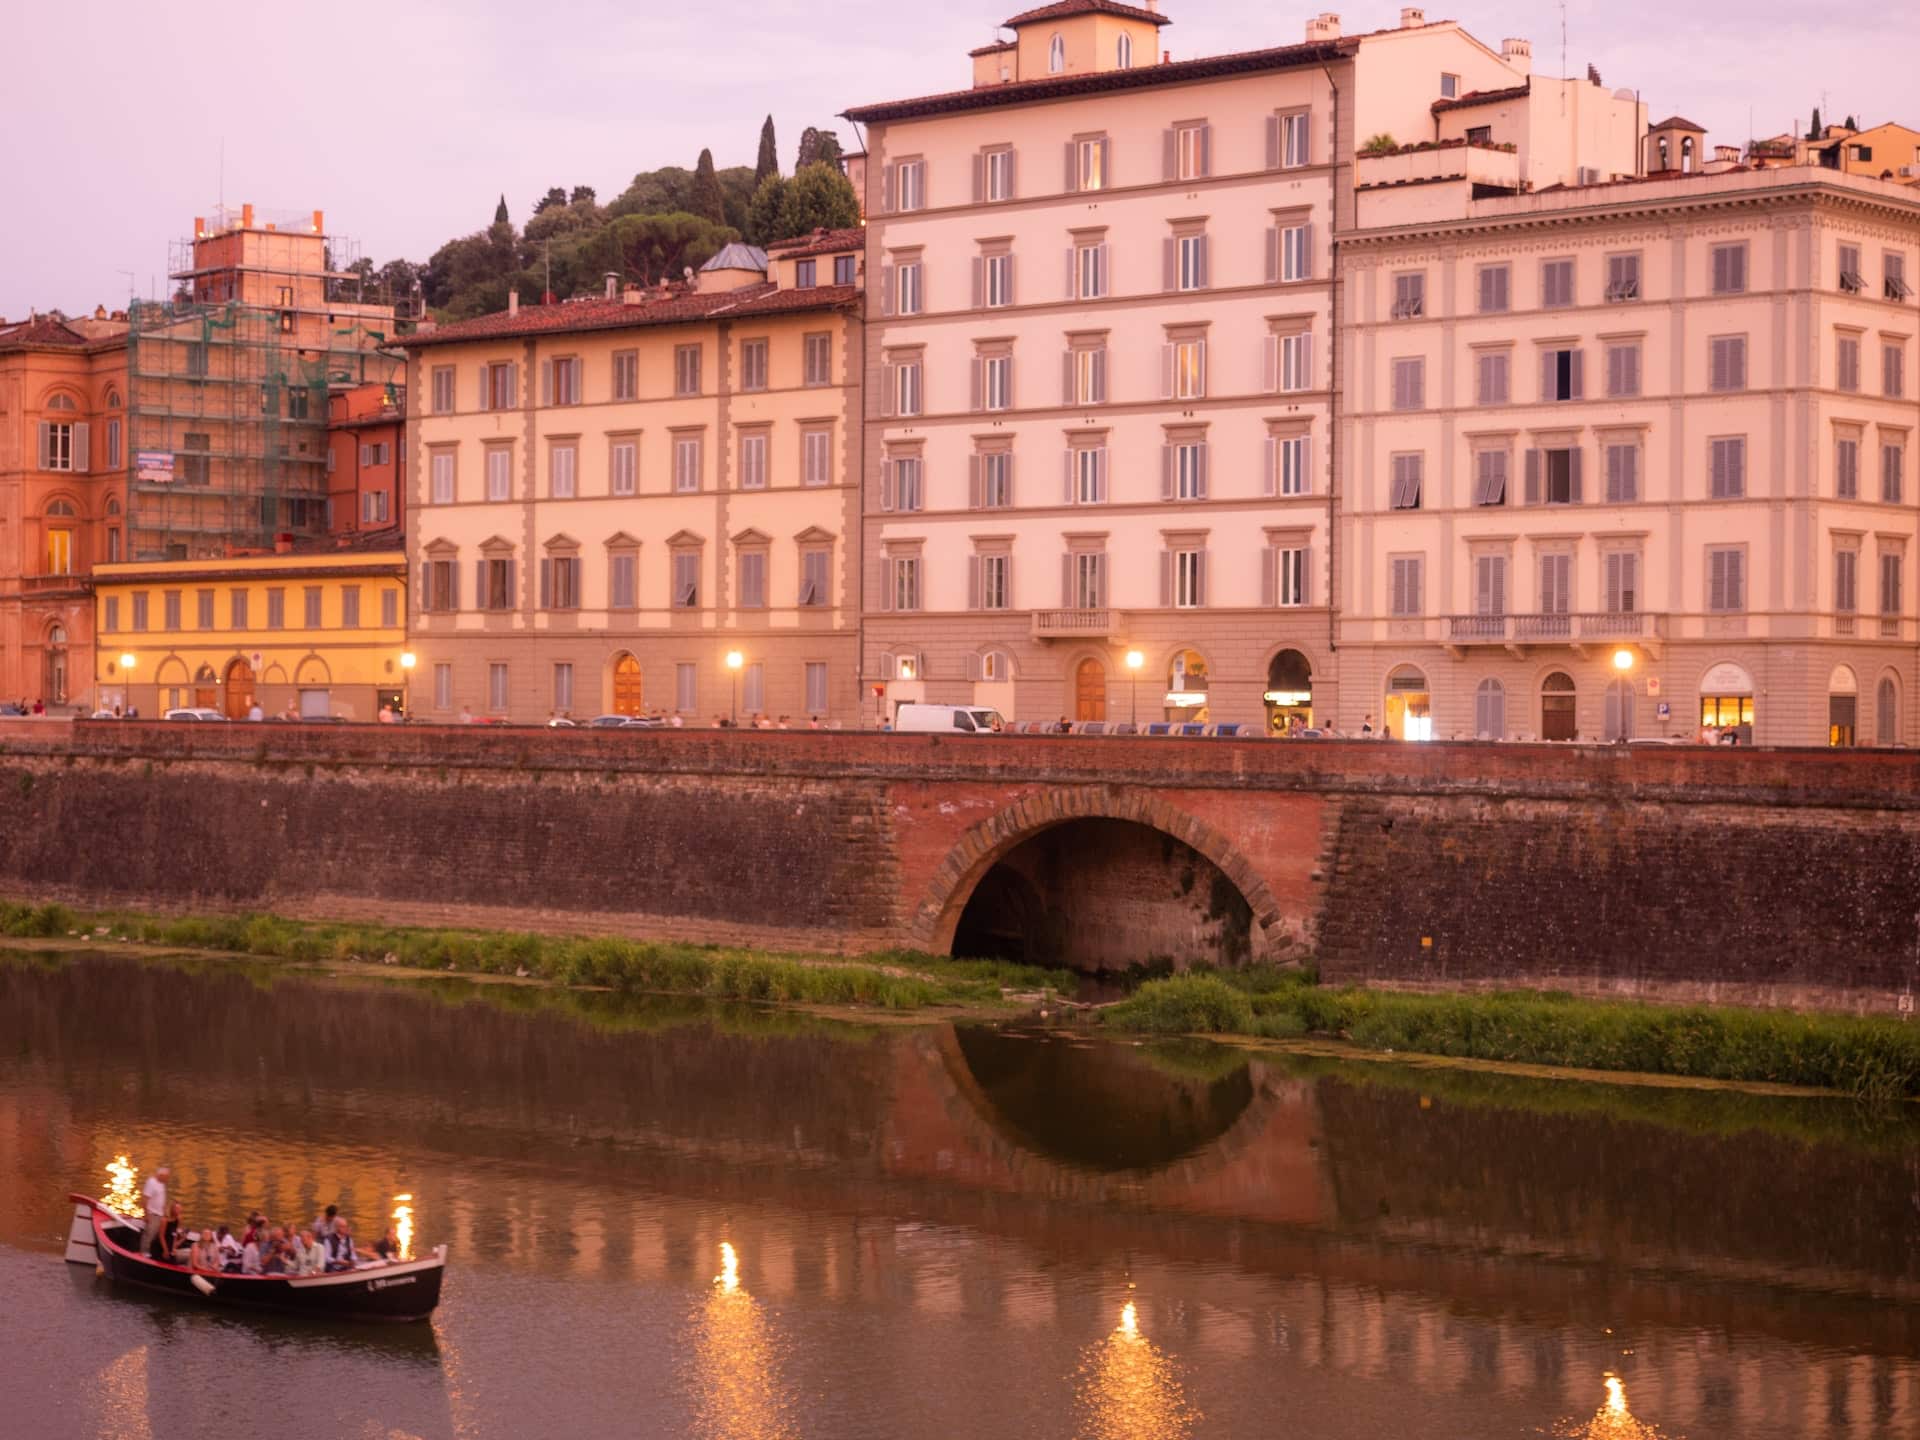 The Best Hotels in Florence